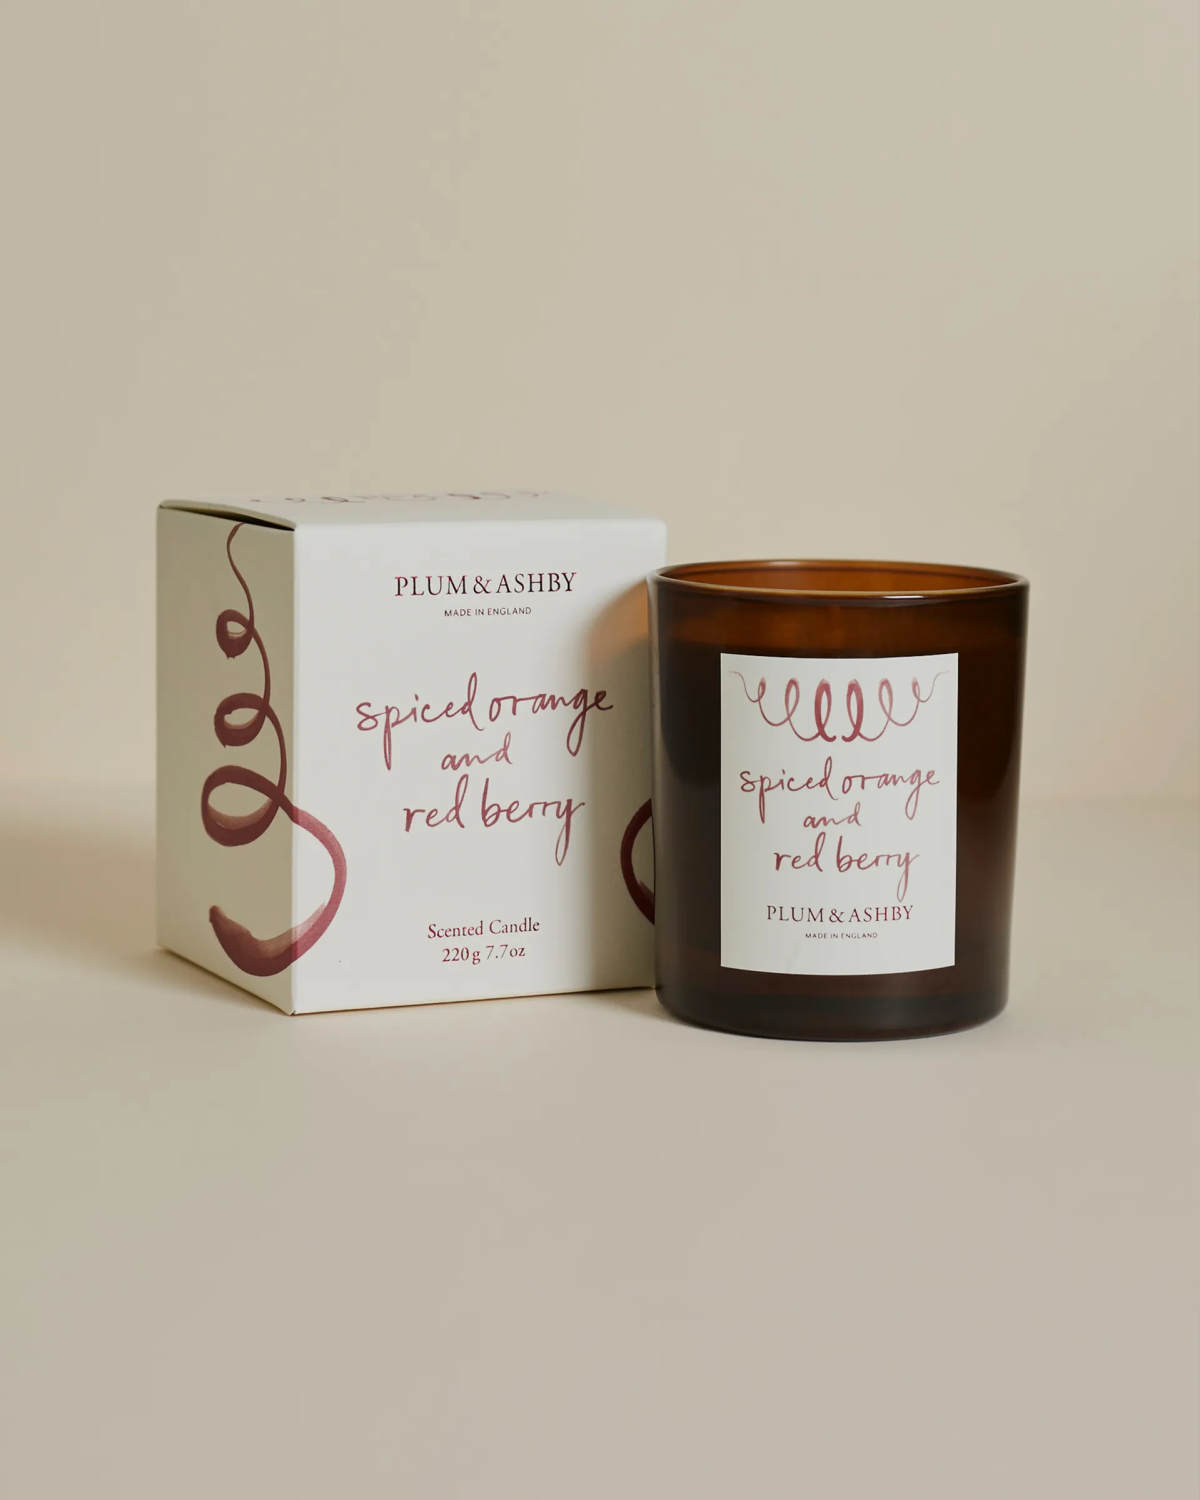 Spiced Orange & Red Berry 220G Candle - Plum & Ashby